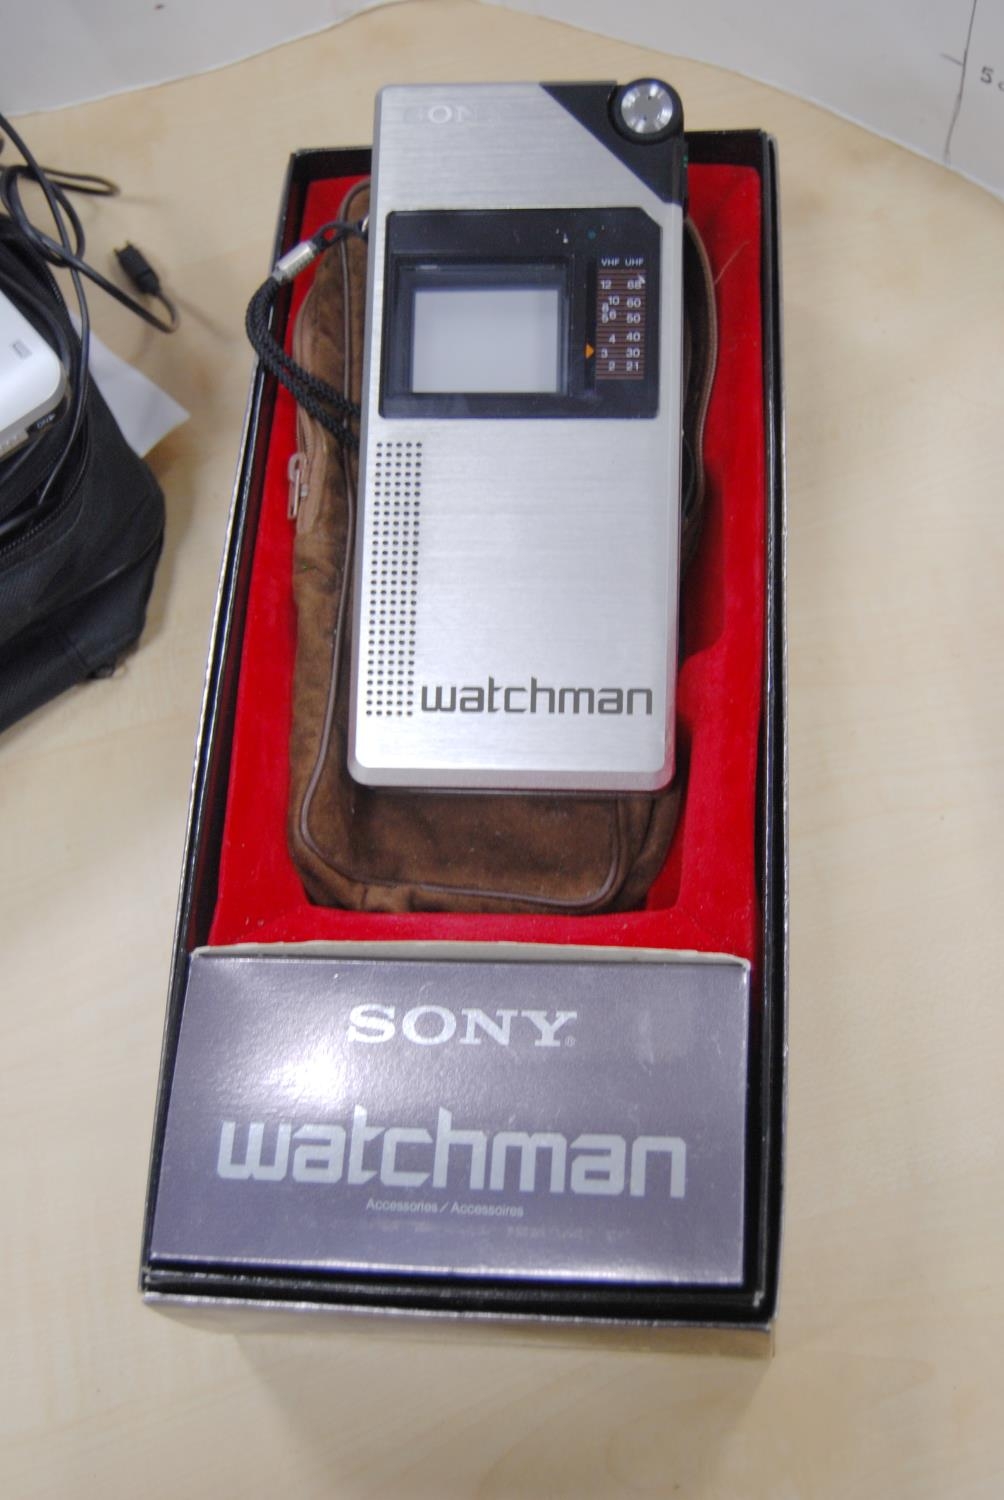 Bush portable DVD player with carry bag and accessories, and a boxed Sony Watchman with pouch. - Image 2 of 7